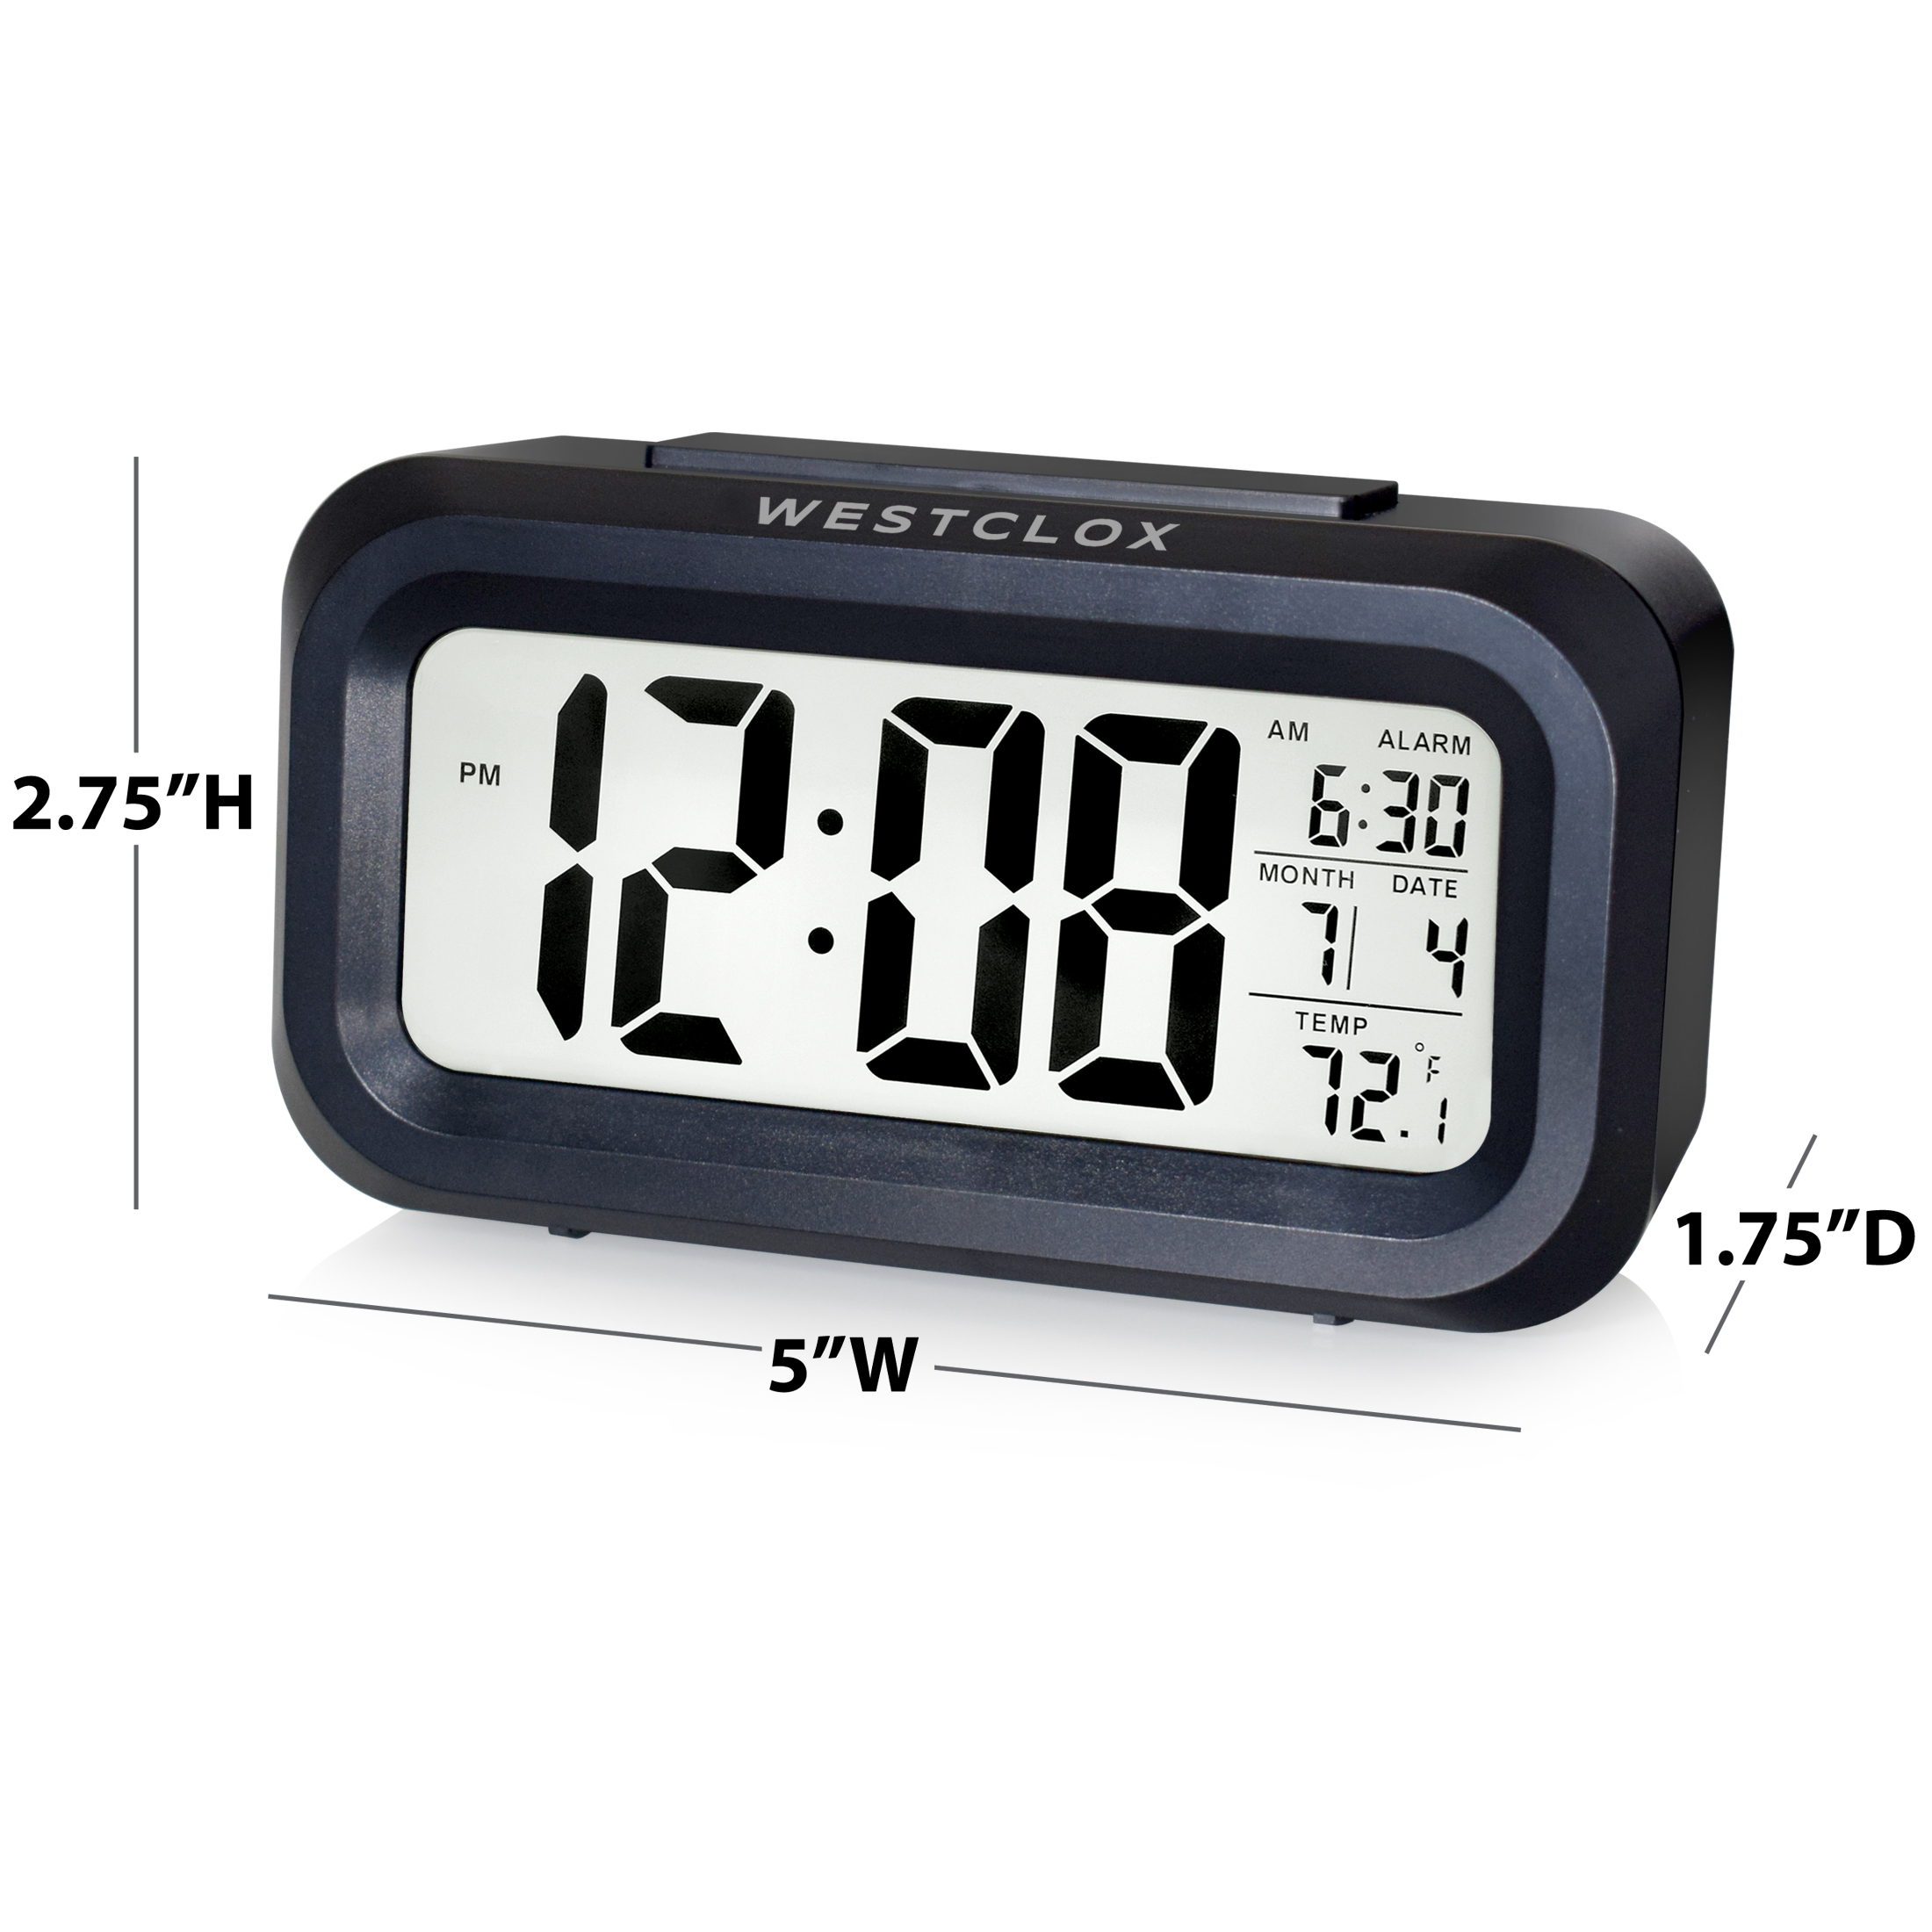 Mainstays Black Digital Alarm Clock with LED Backlight and Easy-to-Read LCD Display - image 4 of 5